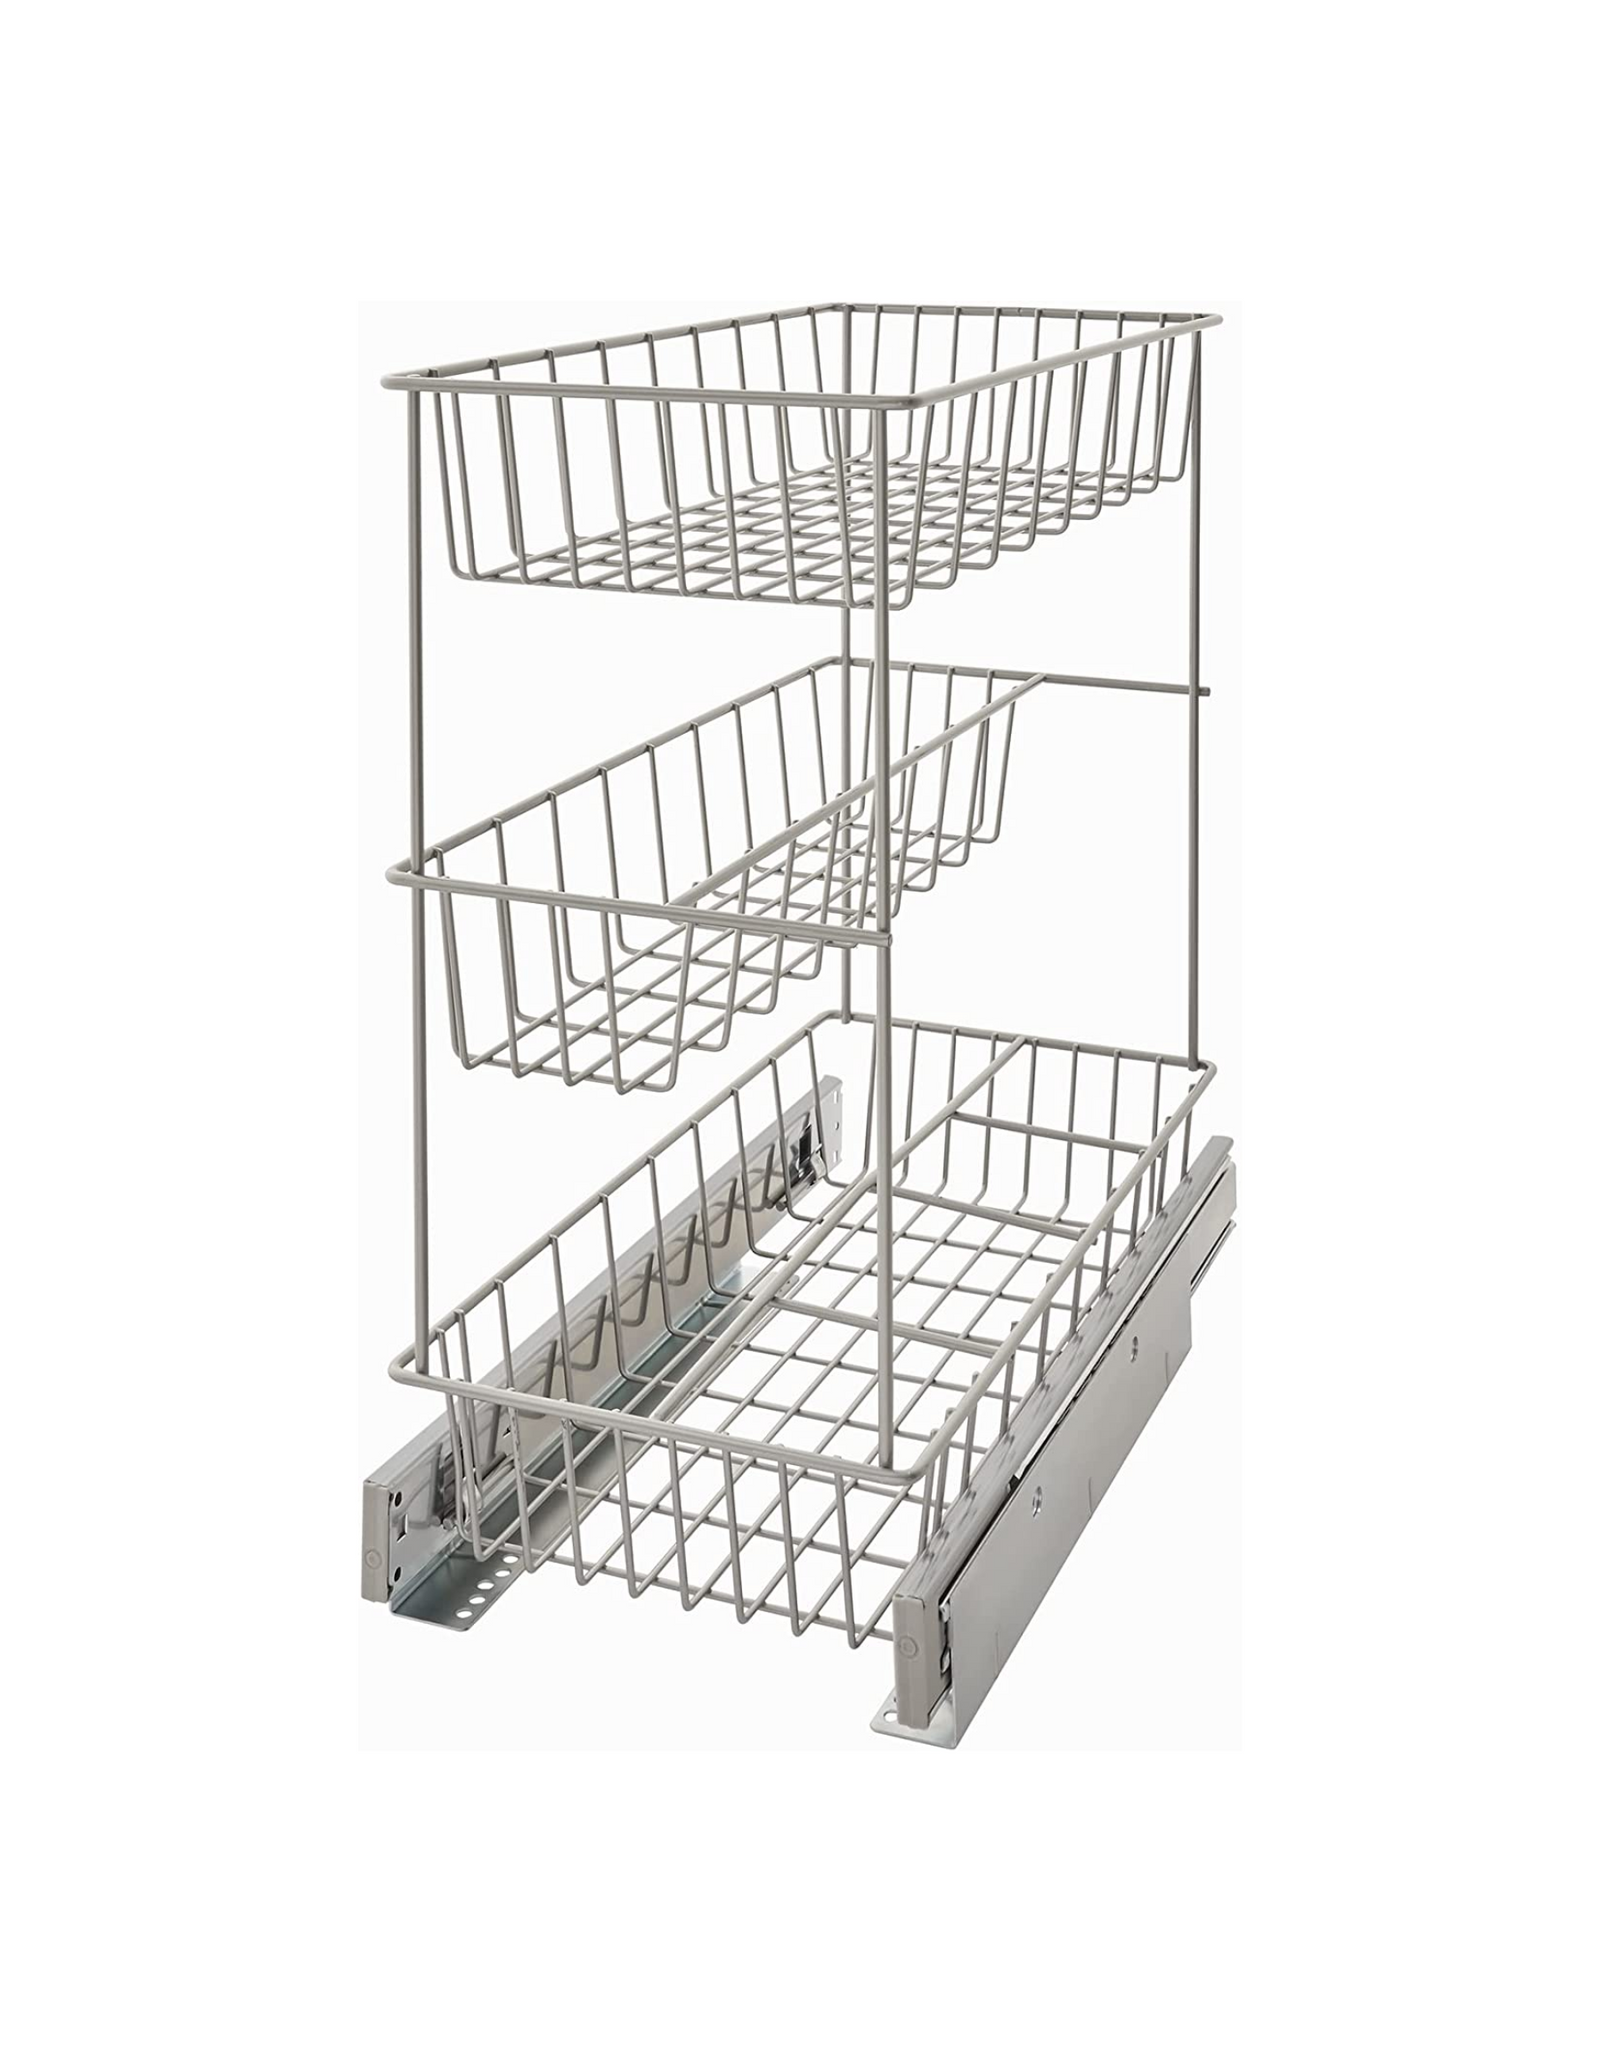 ClosetMaid 32105 Premium Wide 3-Tier Pull-Out Basket, 8.75-Inch